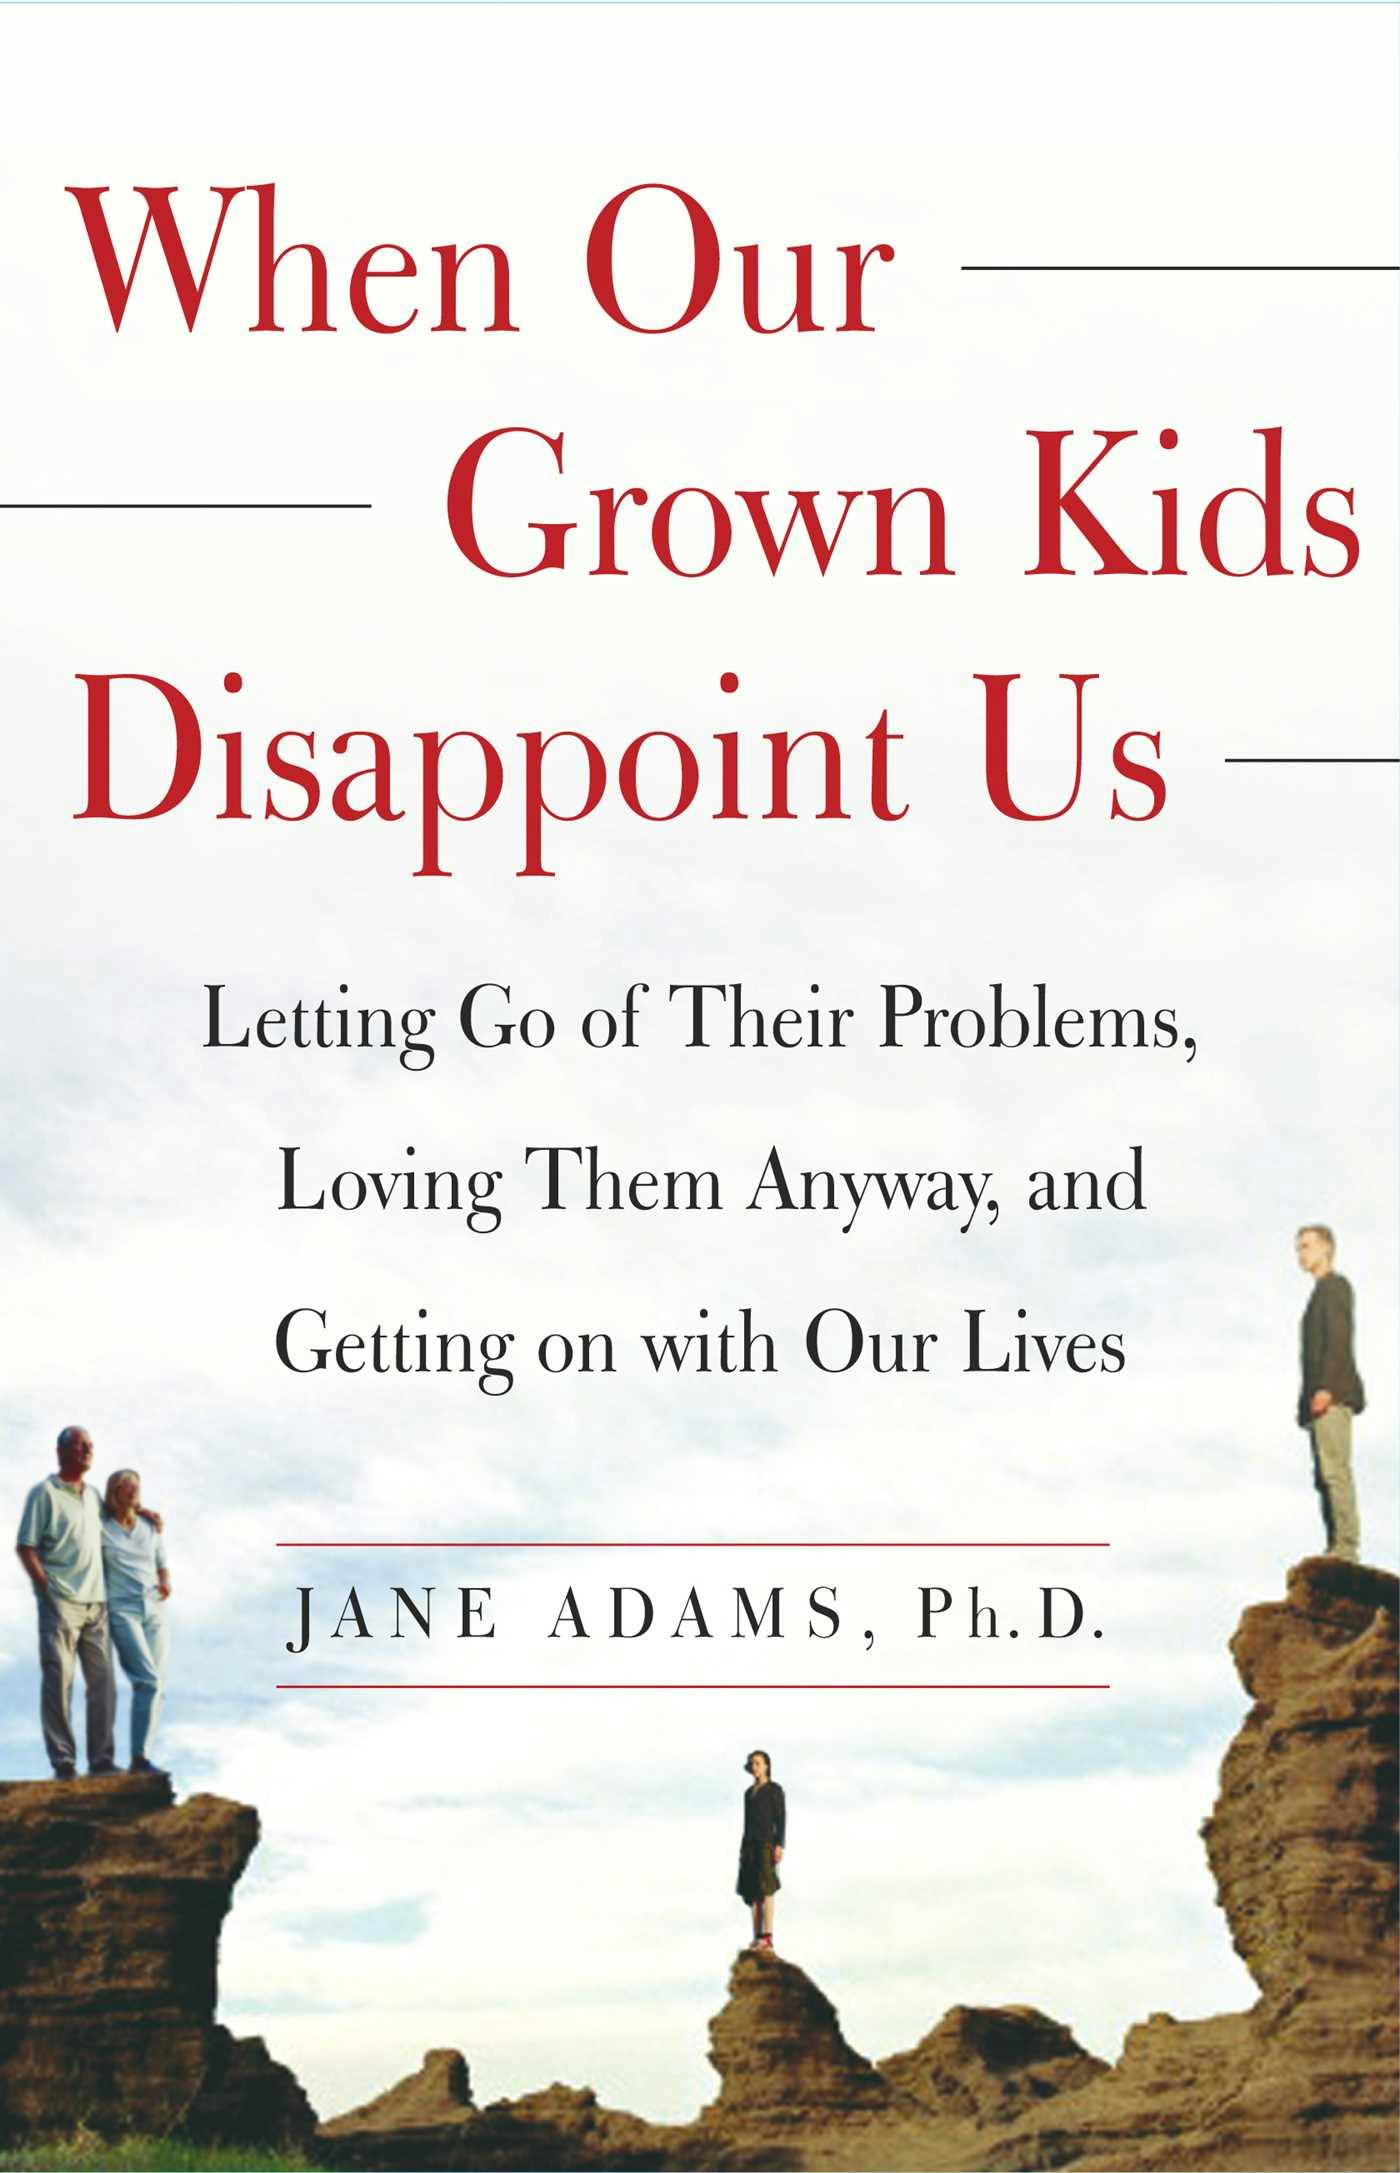 When Our Grown Kids Disappoint Us: Letting Go of Their Problems, Loving Them Anyway, - Jane Adams